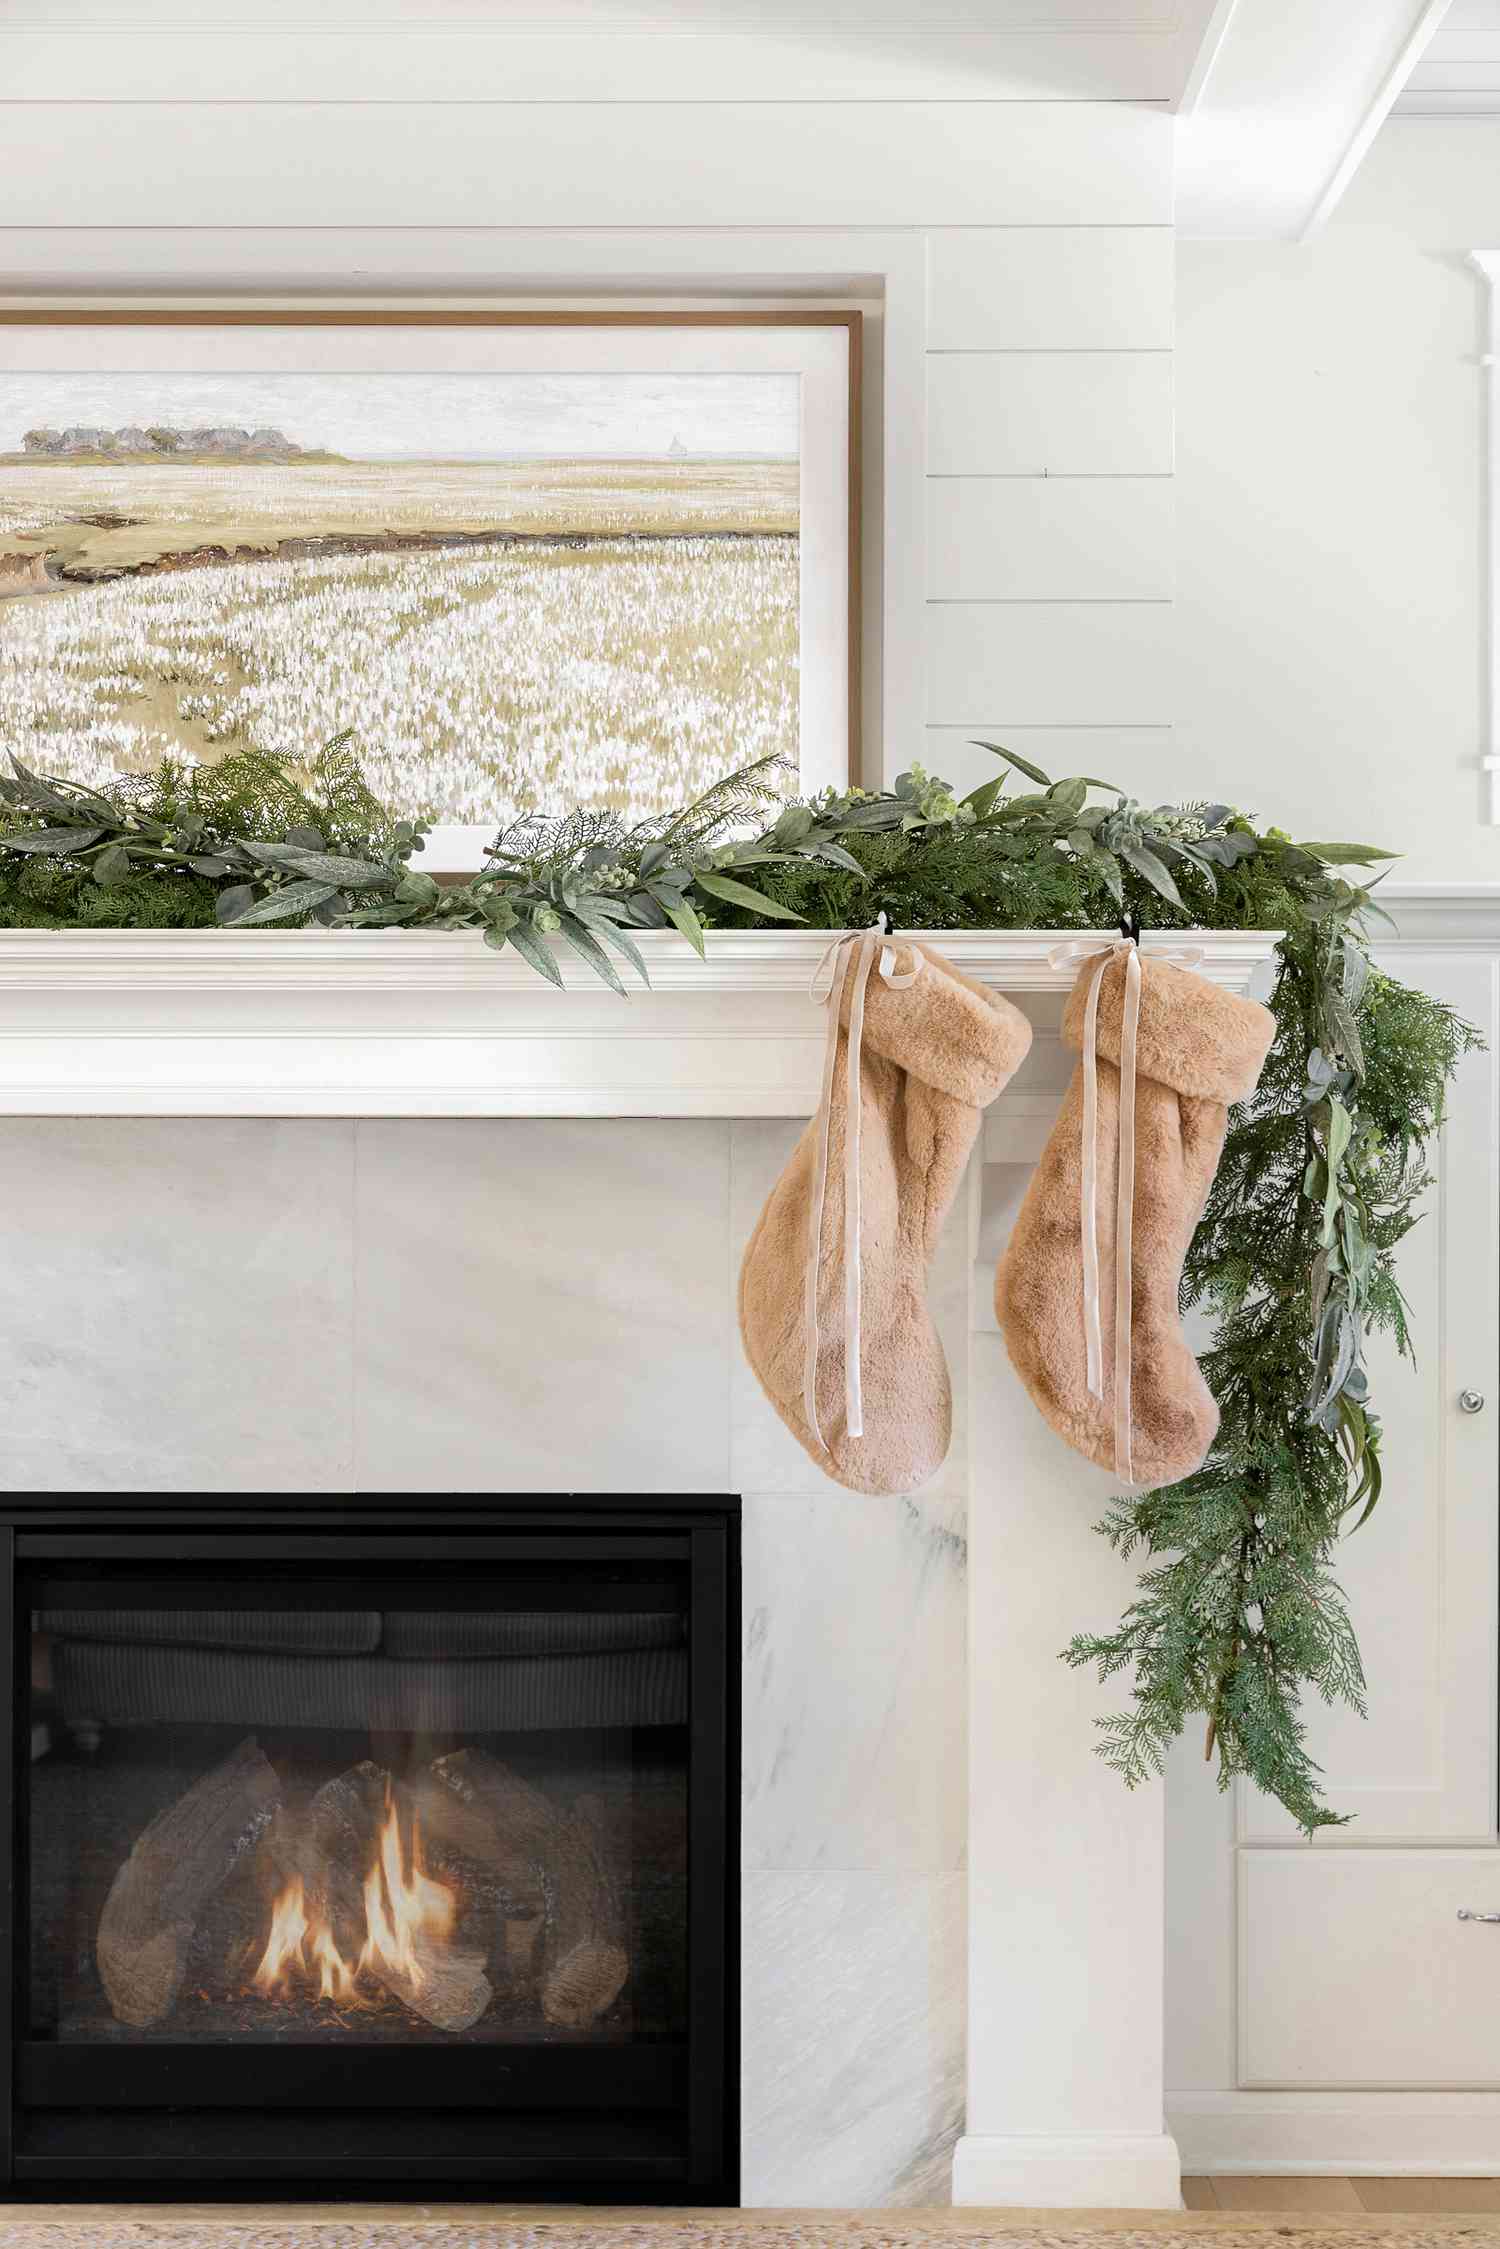 Neutral brown stockings hung on fireplace mantel.